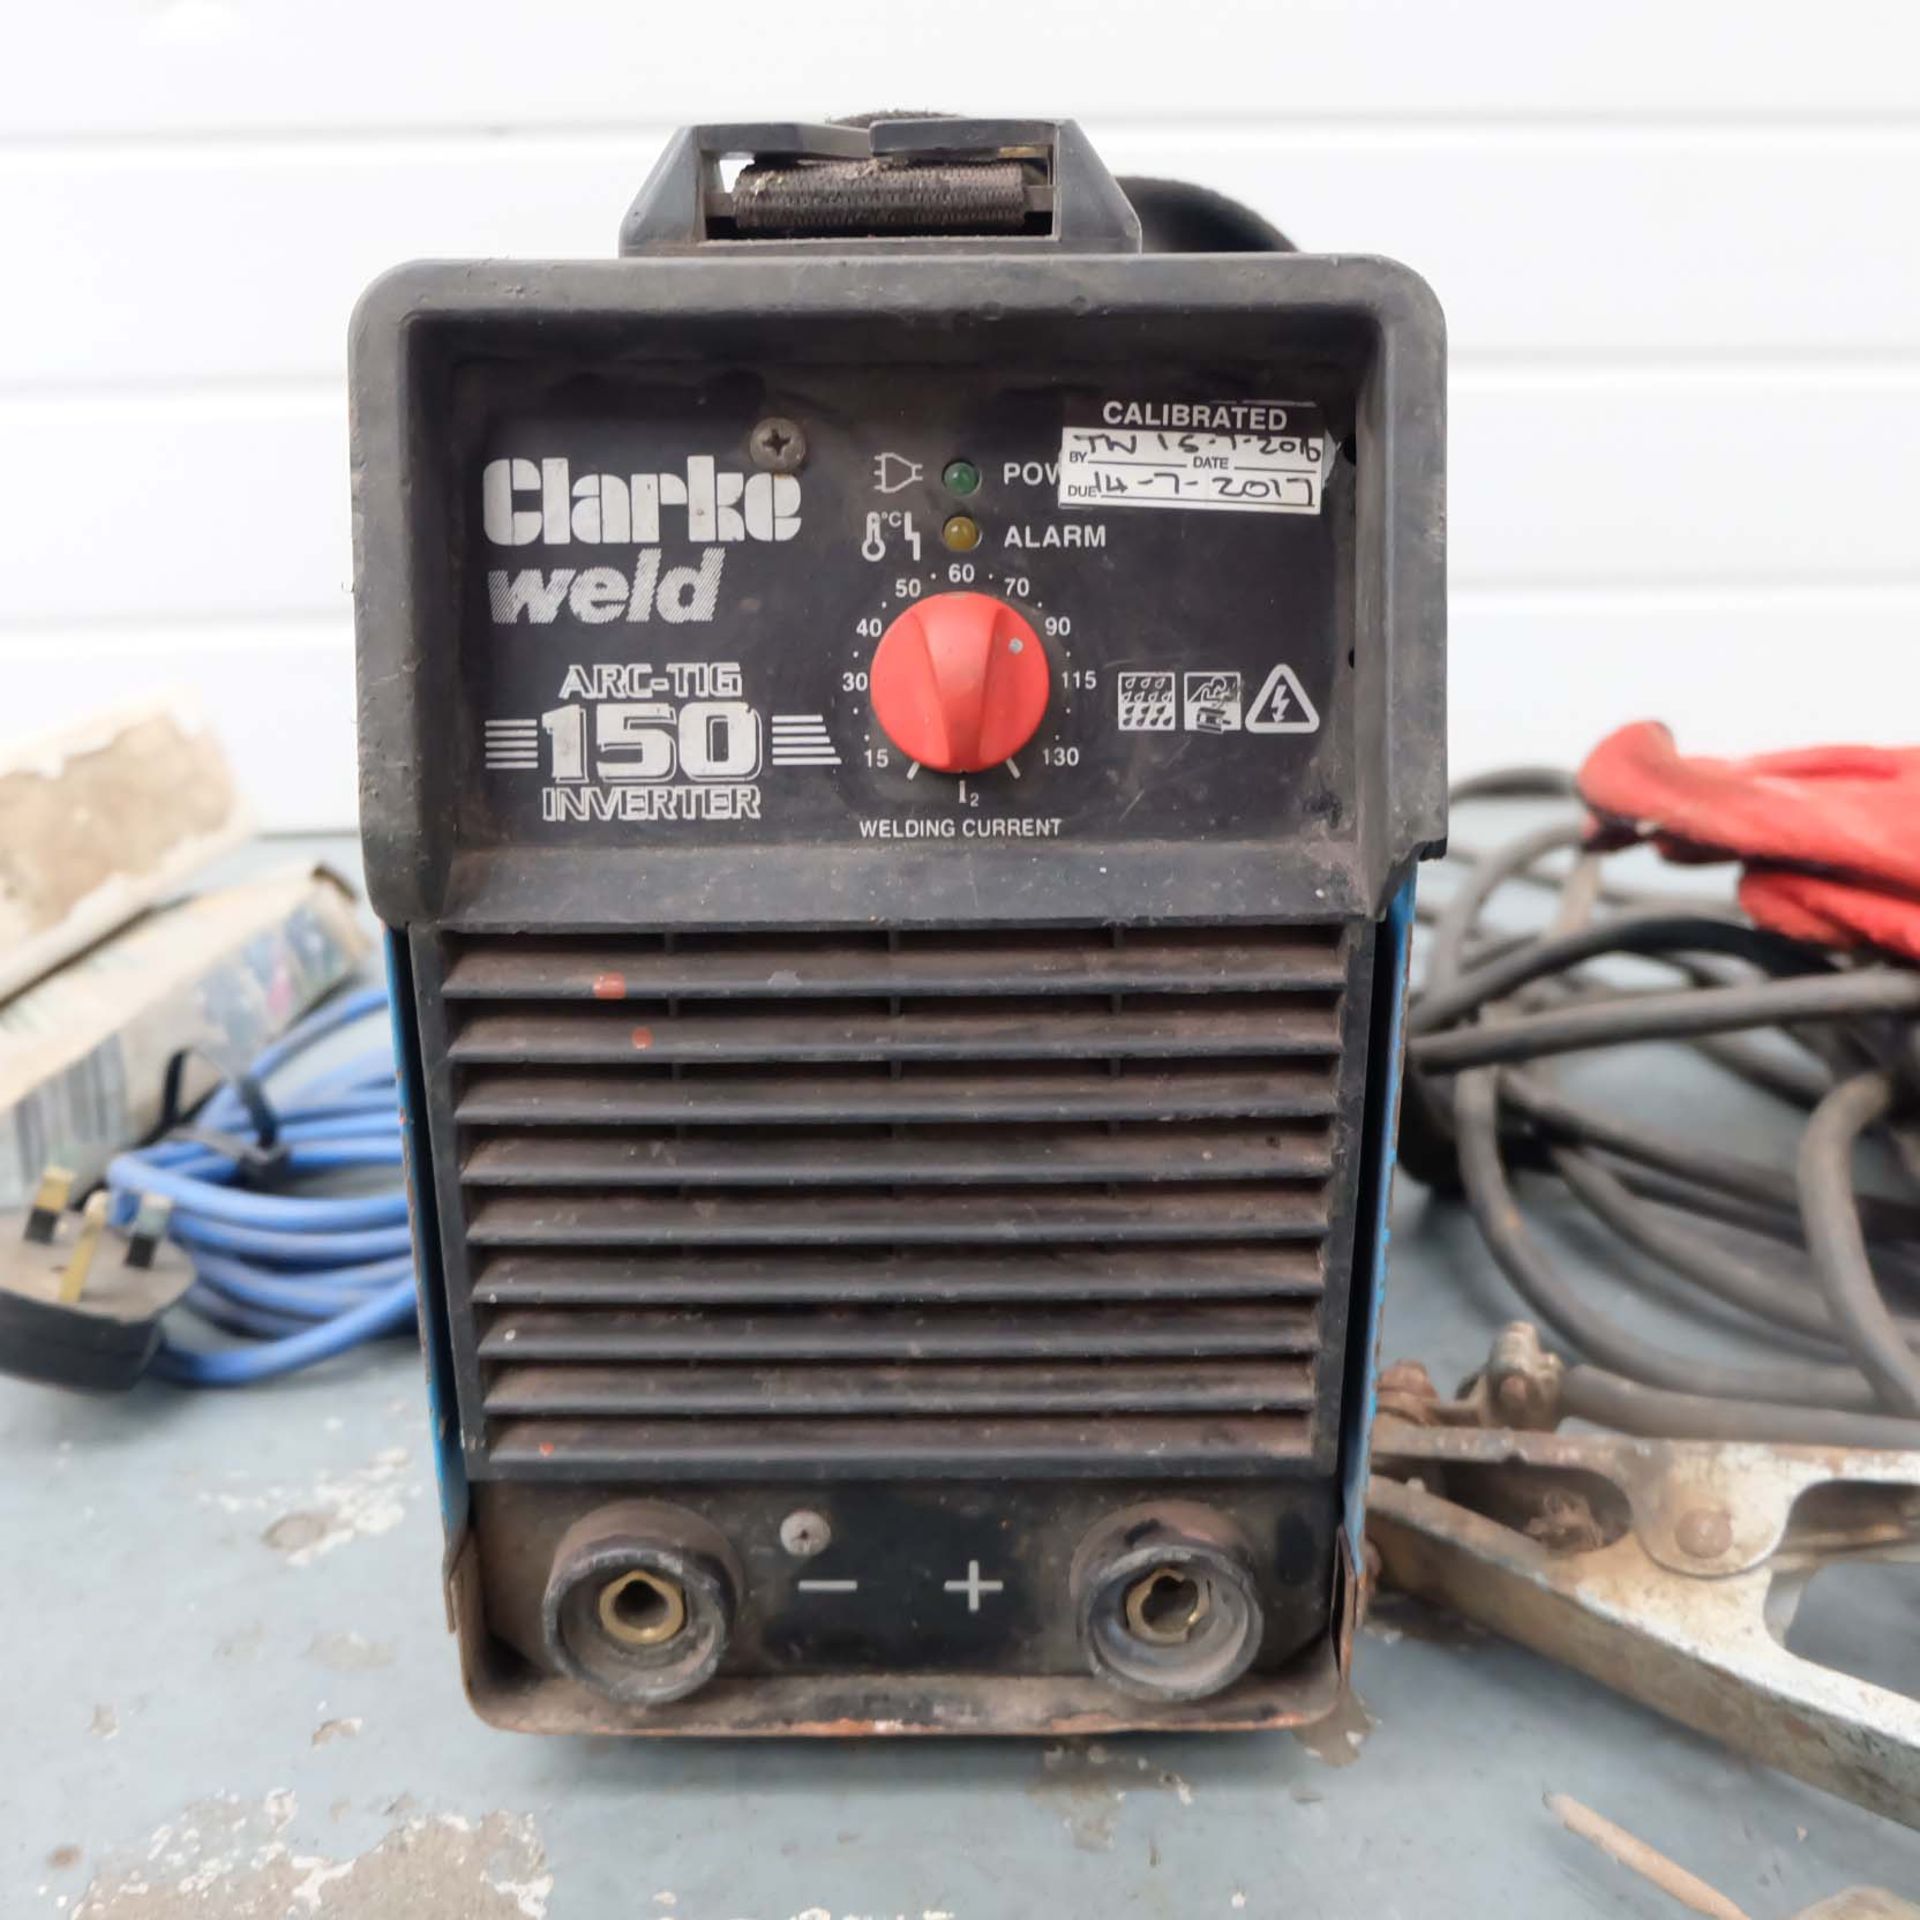 Clarke Weld Type ARC-TIG 150 Single Phase Welding Inverter. Current Range 15A - 130 Amp. Duty Cycle - Image 2 of 6